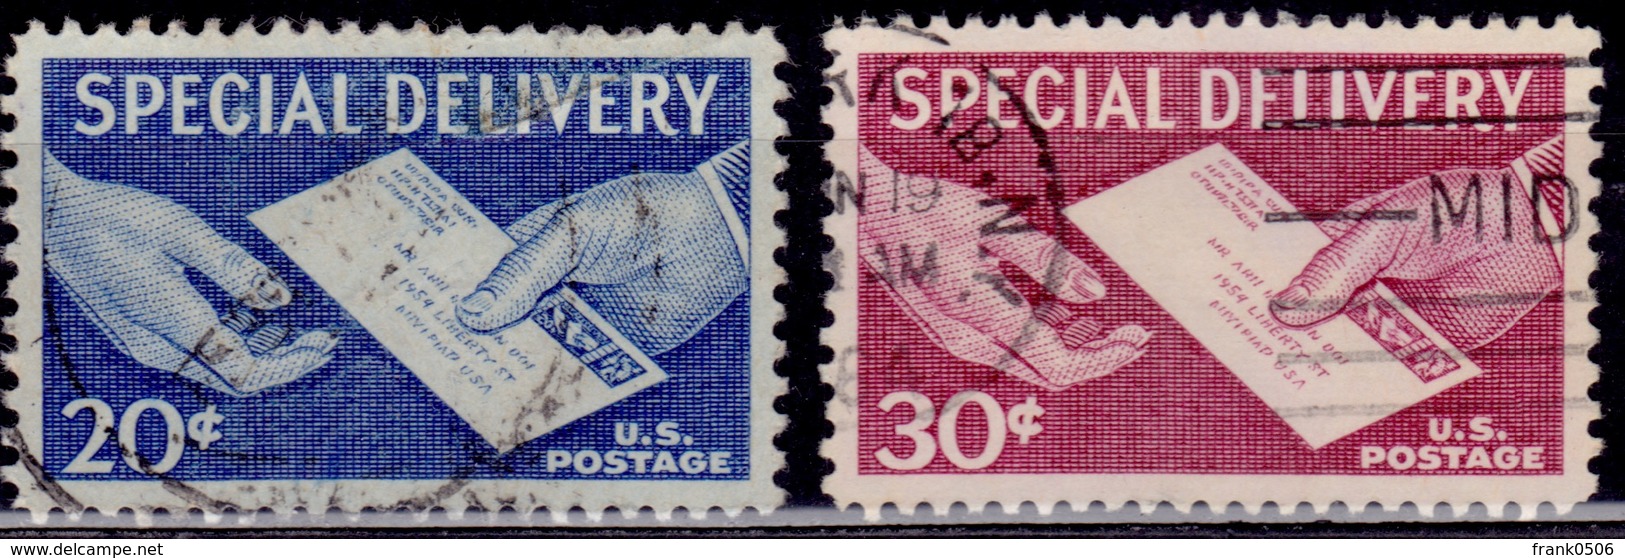 United States 1954-57, Special Delivery, Sc#E20,21, Used - Special Delivery, Registration & Certified